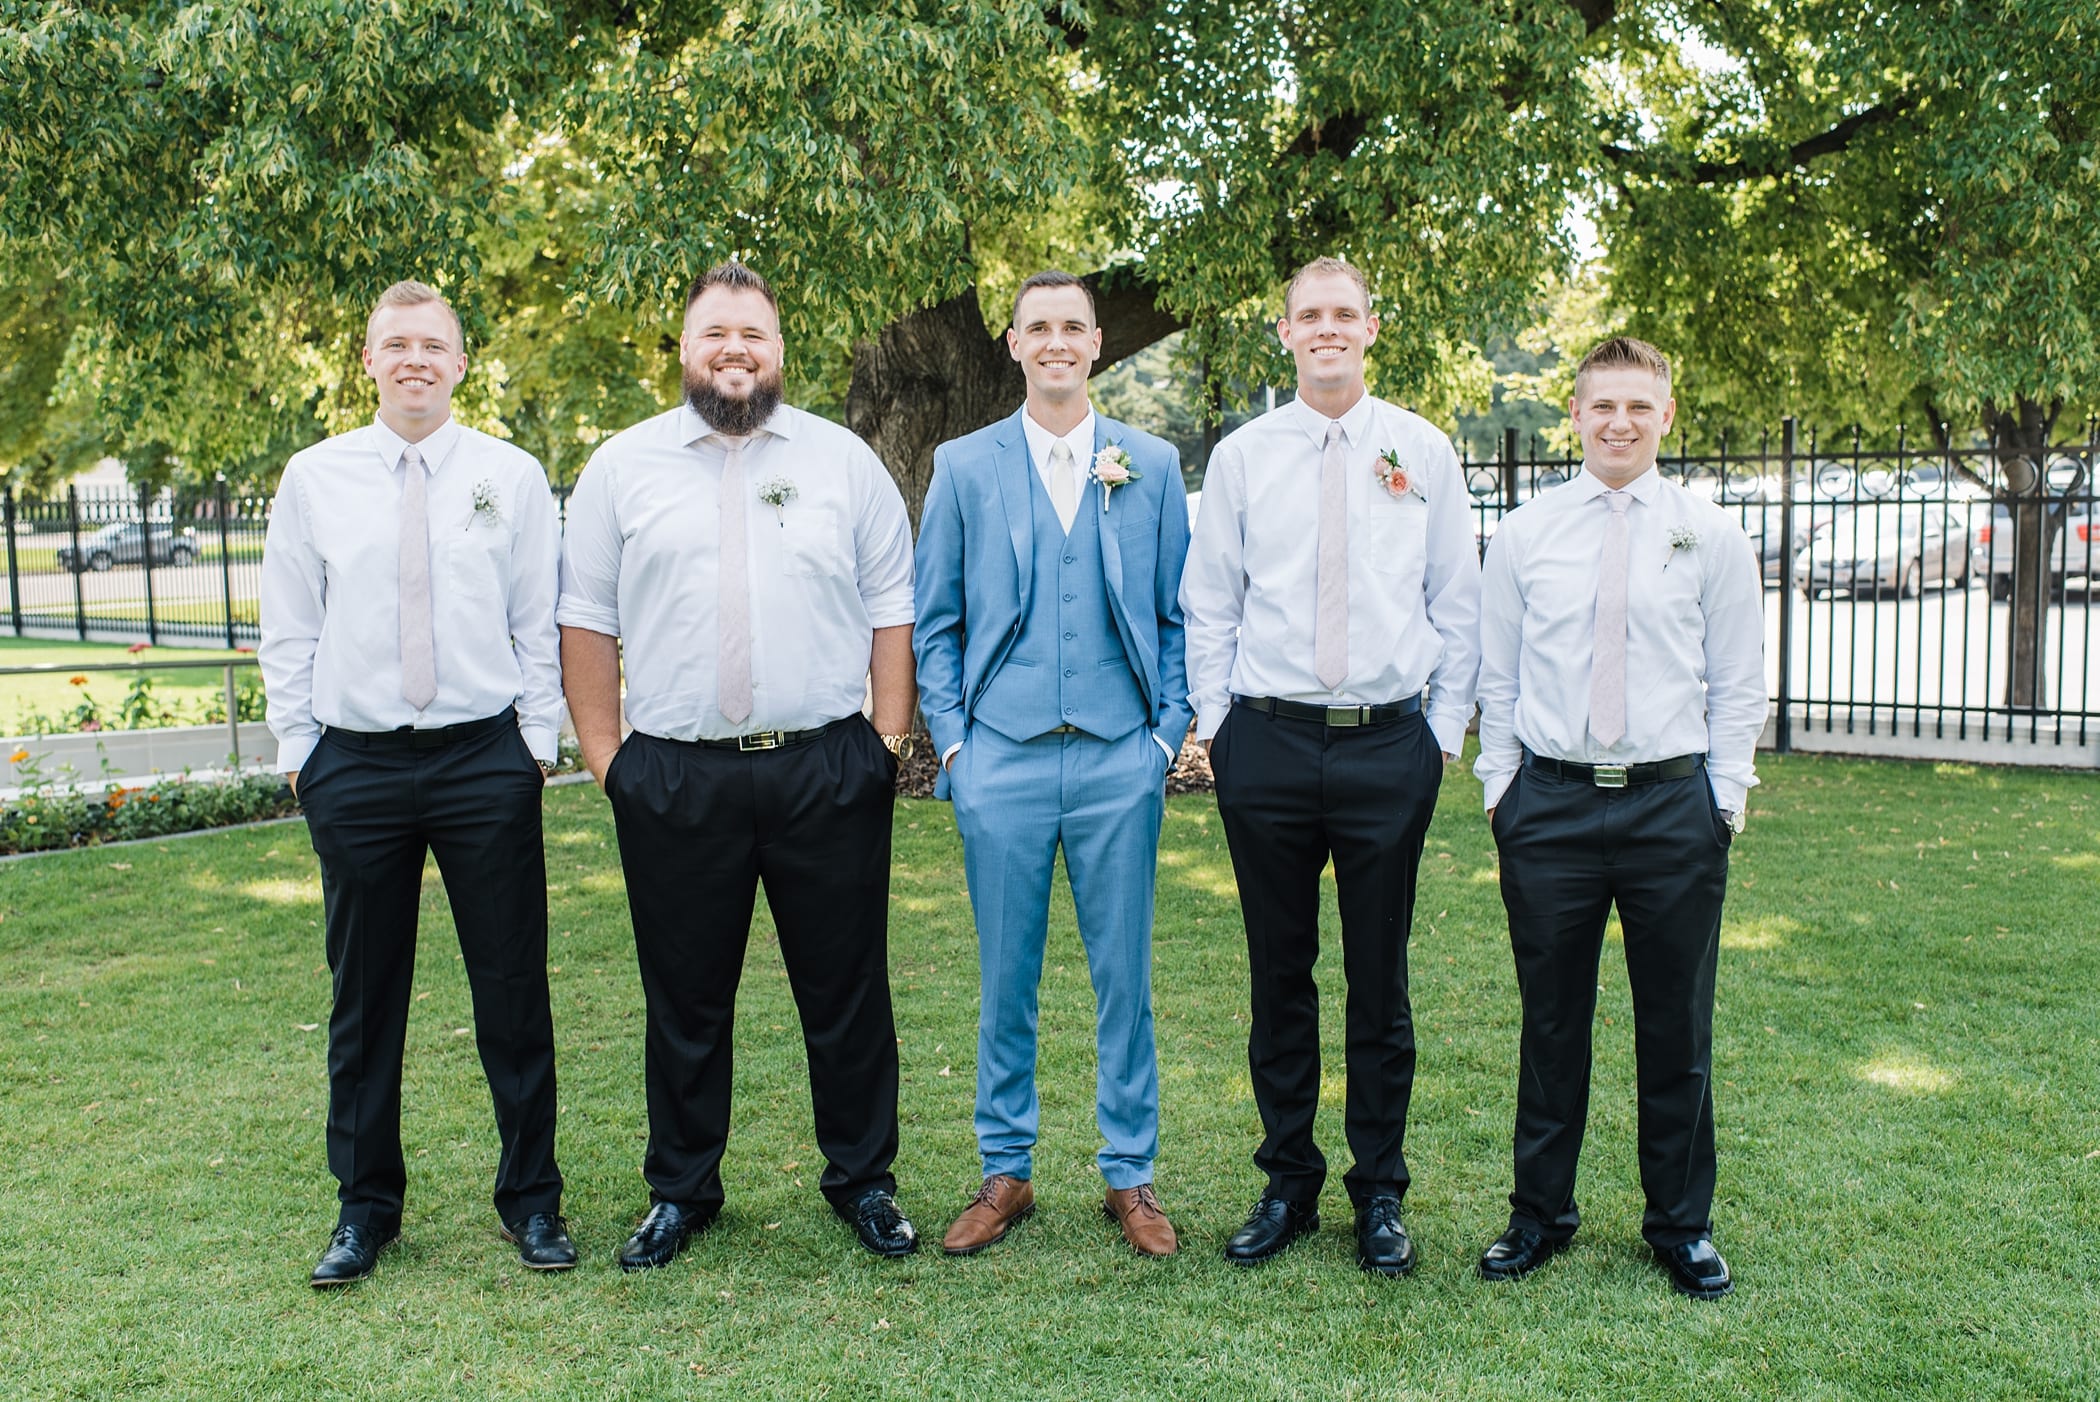 Idaho Falls Temple Wedding in the Summer by Michelle & Logan